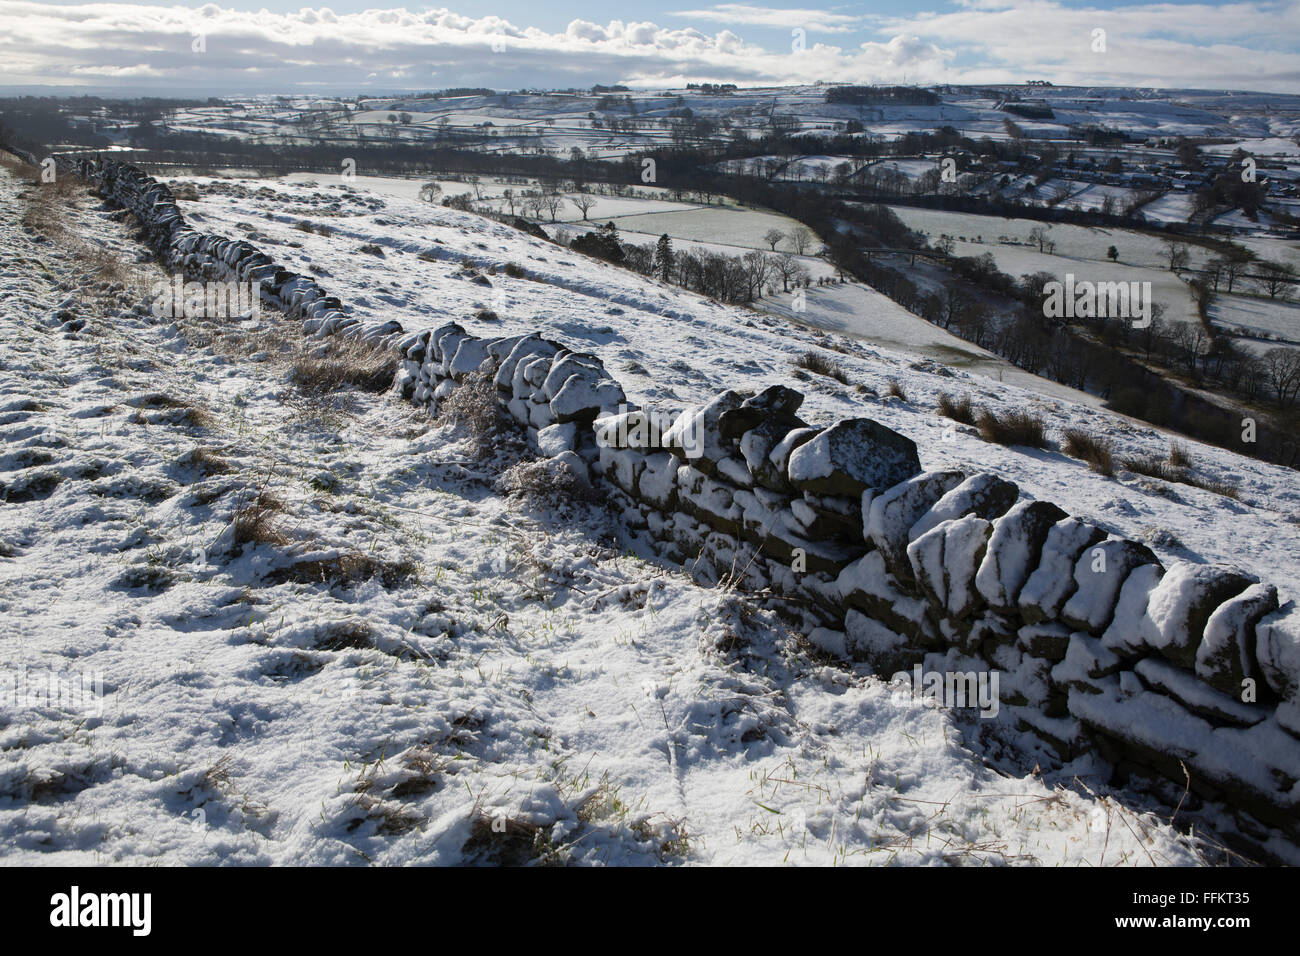 Snowy fields at Upper Teesdale in County Durham, England. A dry stone wall runs through the foreground. Stock Photo